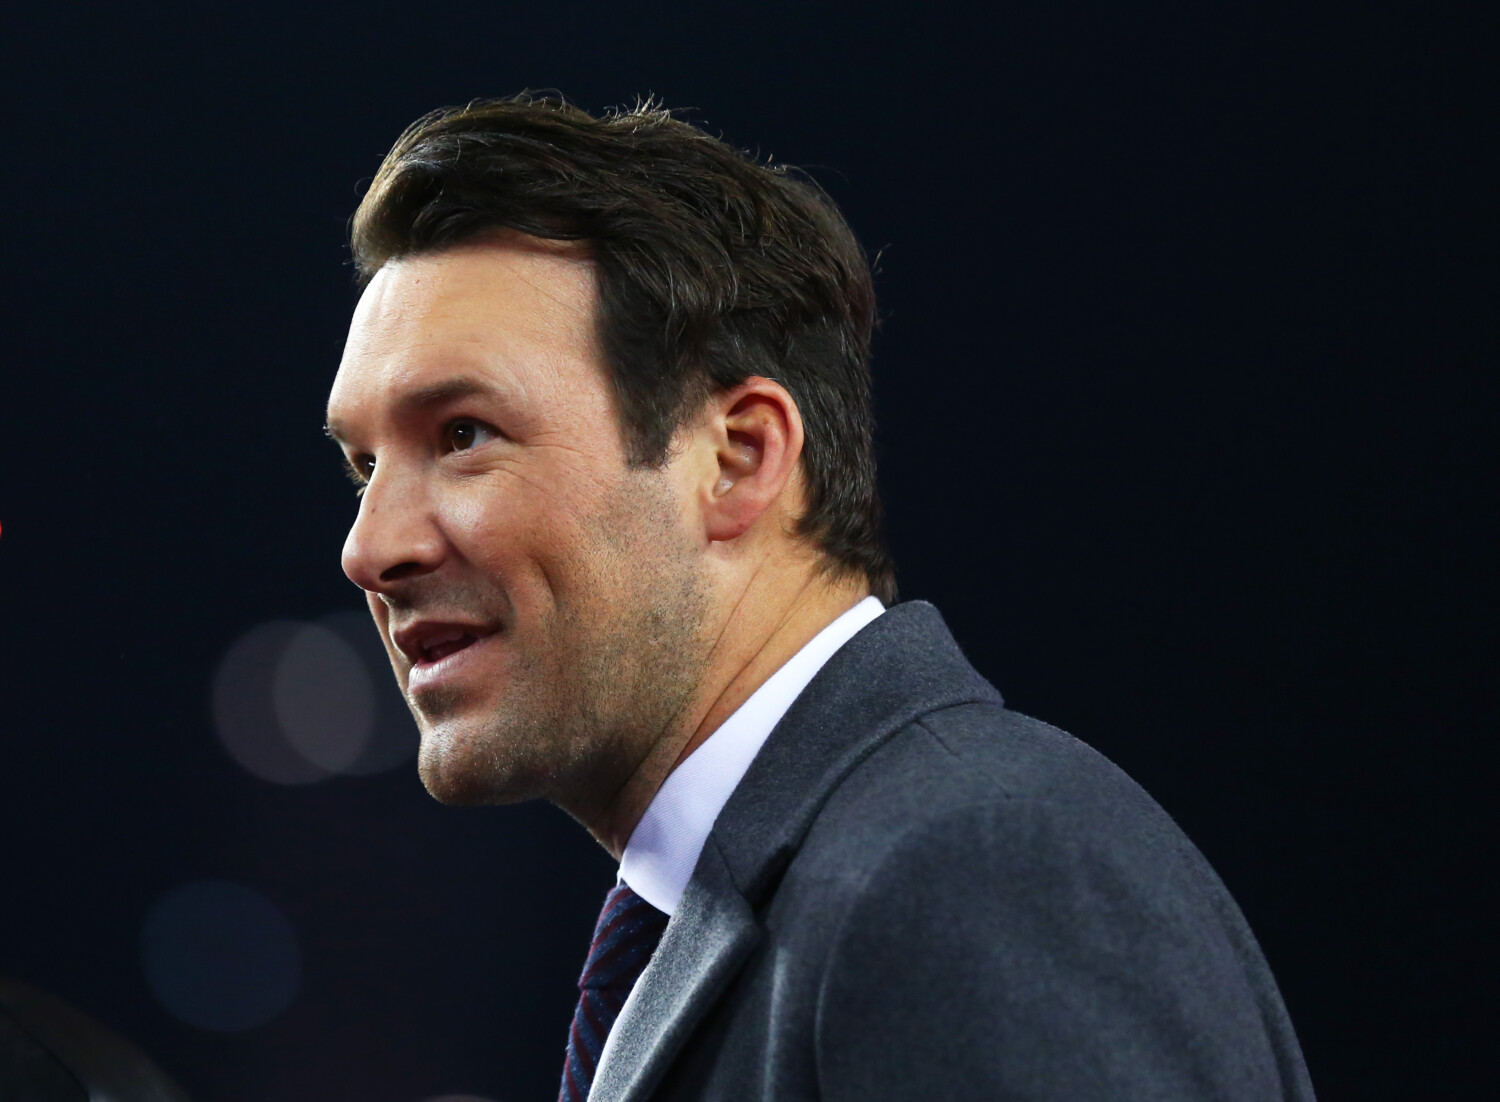 Today's AFC Championship Could Be the Final Game for Tony Romo at CBS Sports